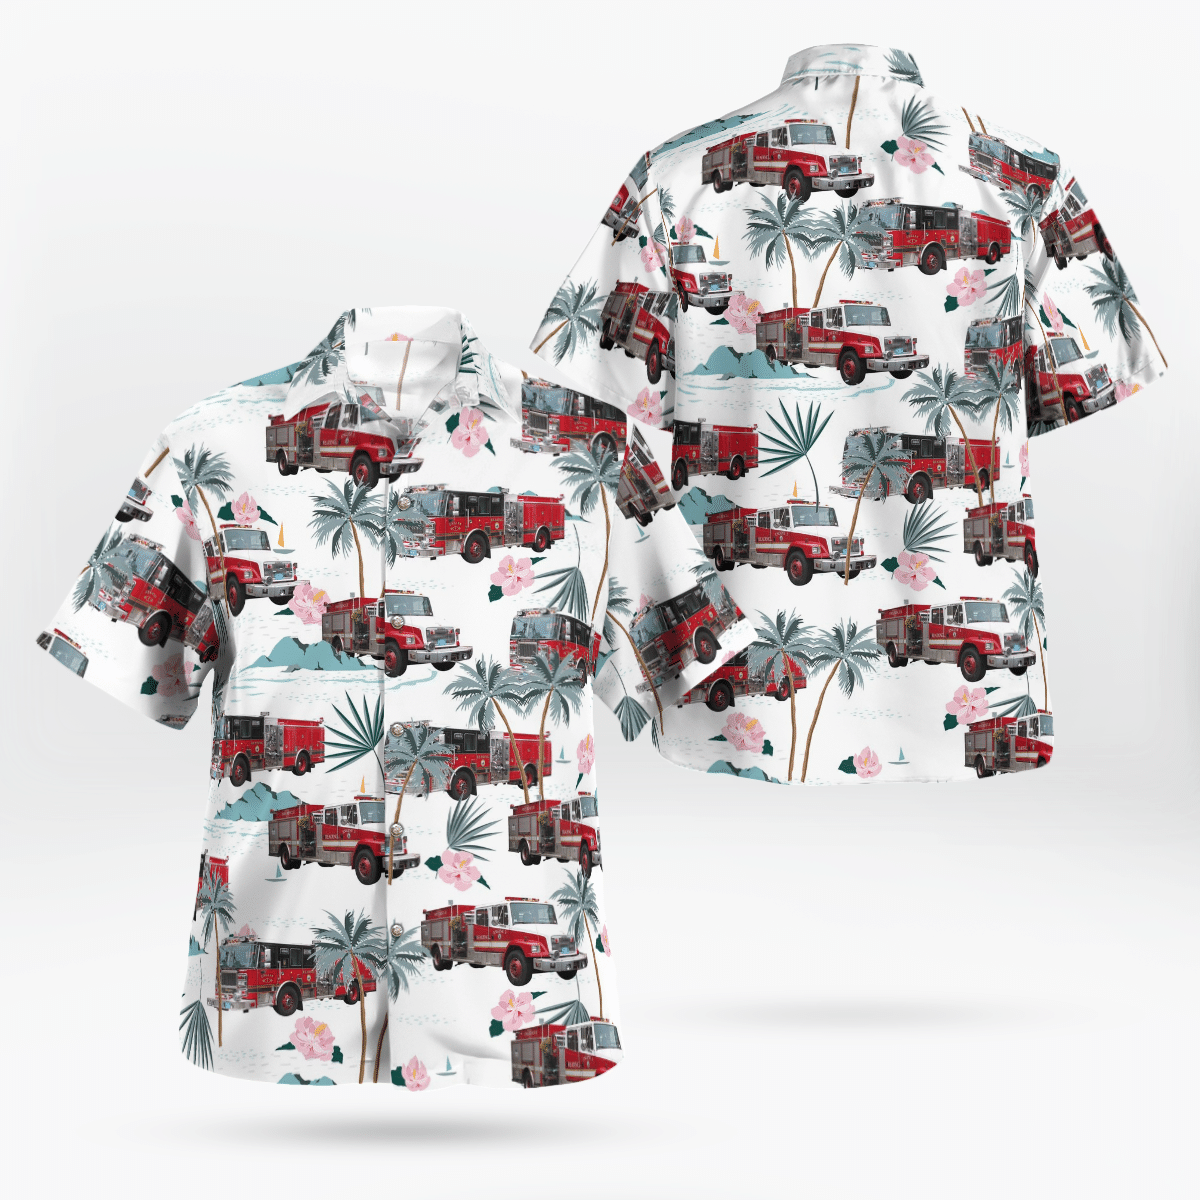 Designed for comfort, Hawaiian Shirt are an excellent choice for beach vacation 147